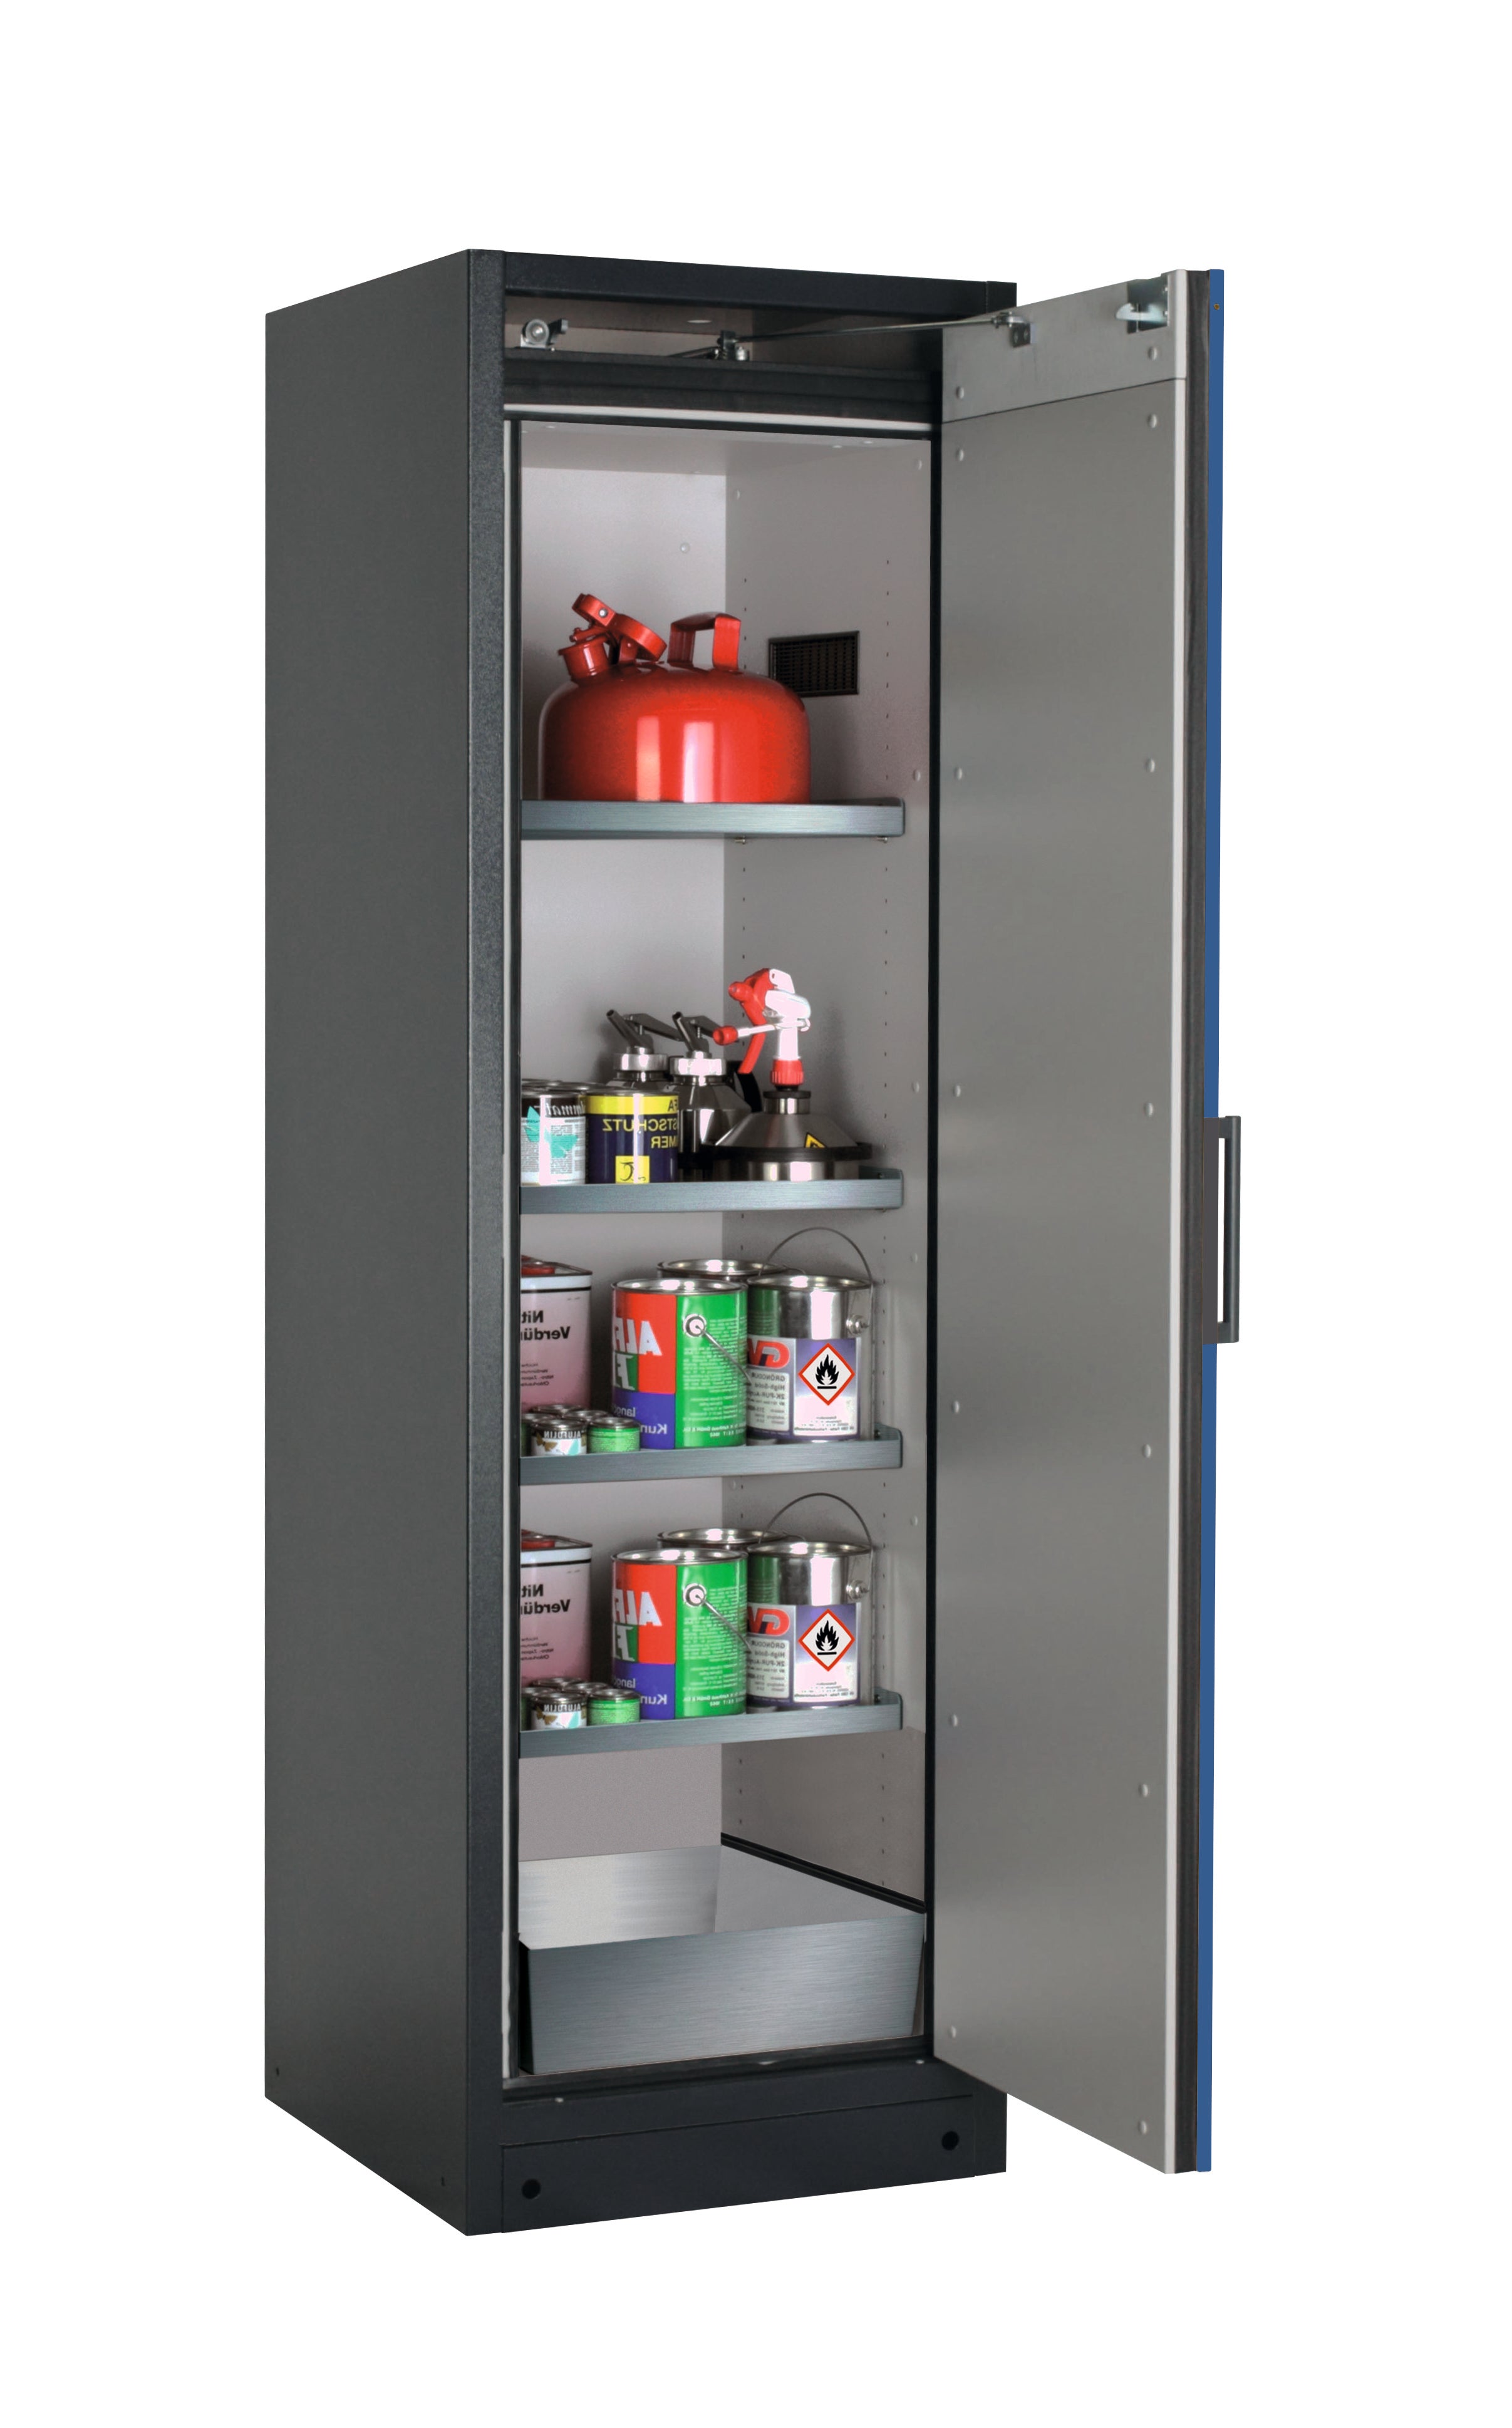 Type 90 safety storage cabinet Q-CLASSIC-90 model Q90.195.060.R in gentian blue RAL 5010 with 4x shelf standard (stainless steel 1.4301),